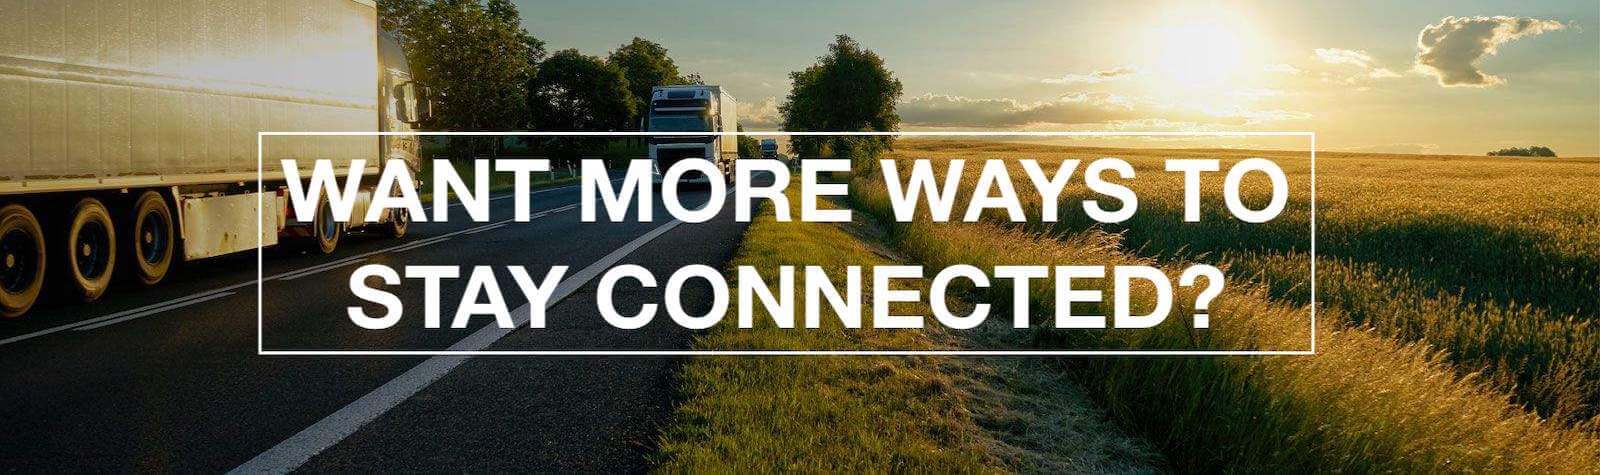 tractor trailers driving at sunset get connected slogan banner